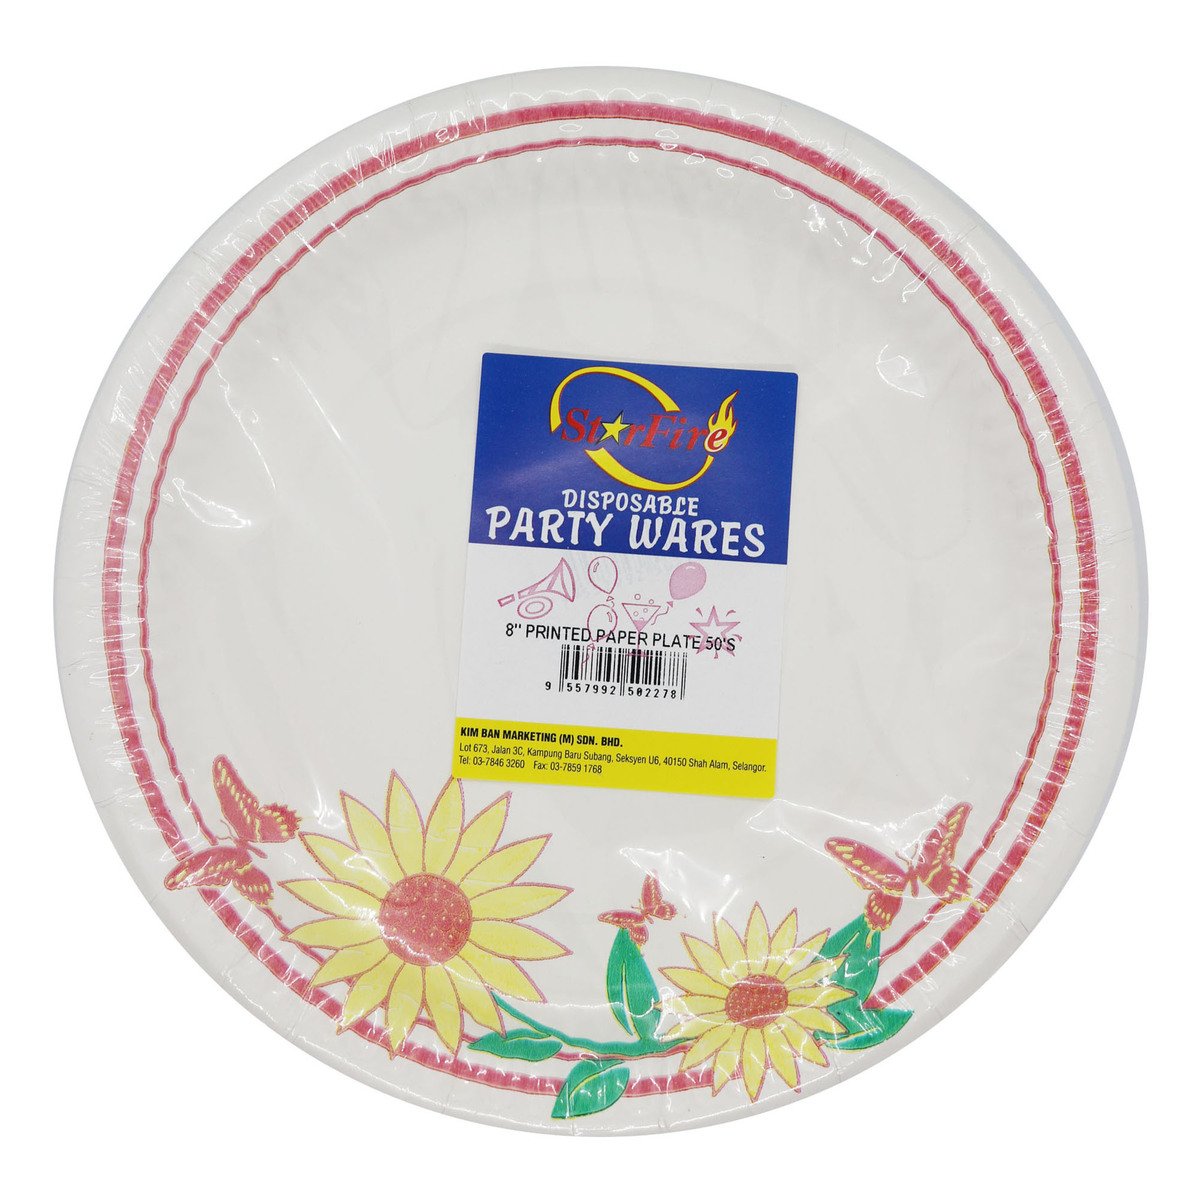 Star Fire Printed Paper Plate 8" 50pcs